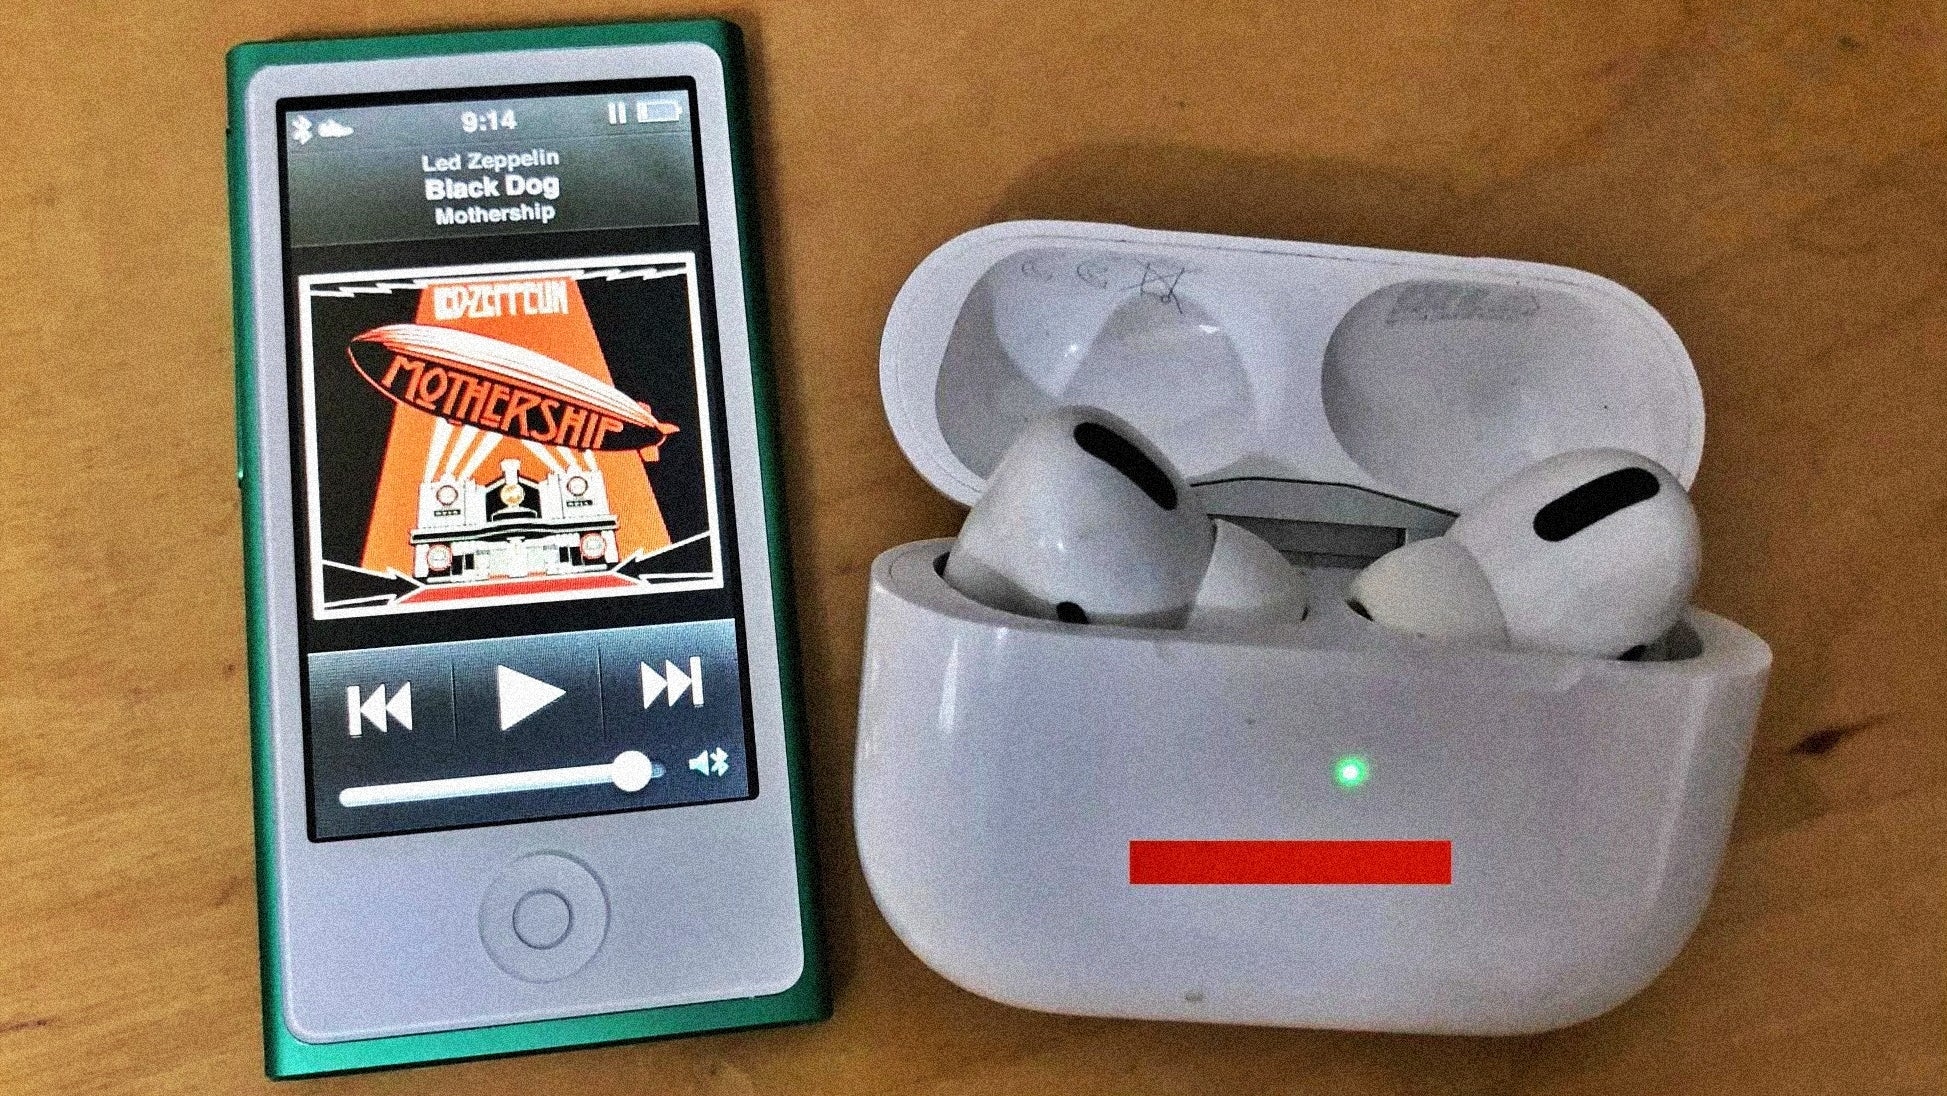 Although the latest (and last) 7th Gen iPod Nano supports Bluetooth and can be paired to AirPods, it can’t run Spotify/Apple Music, which makes it a relic in today’s world of streaming. - AirPods nano: The future of wireless earbuds is the only reason Apple should make another iPod